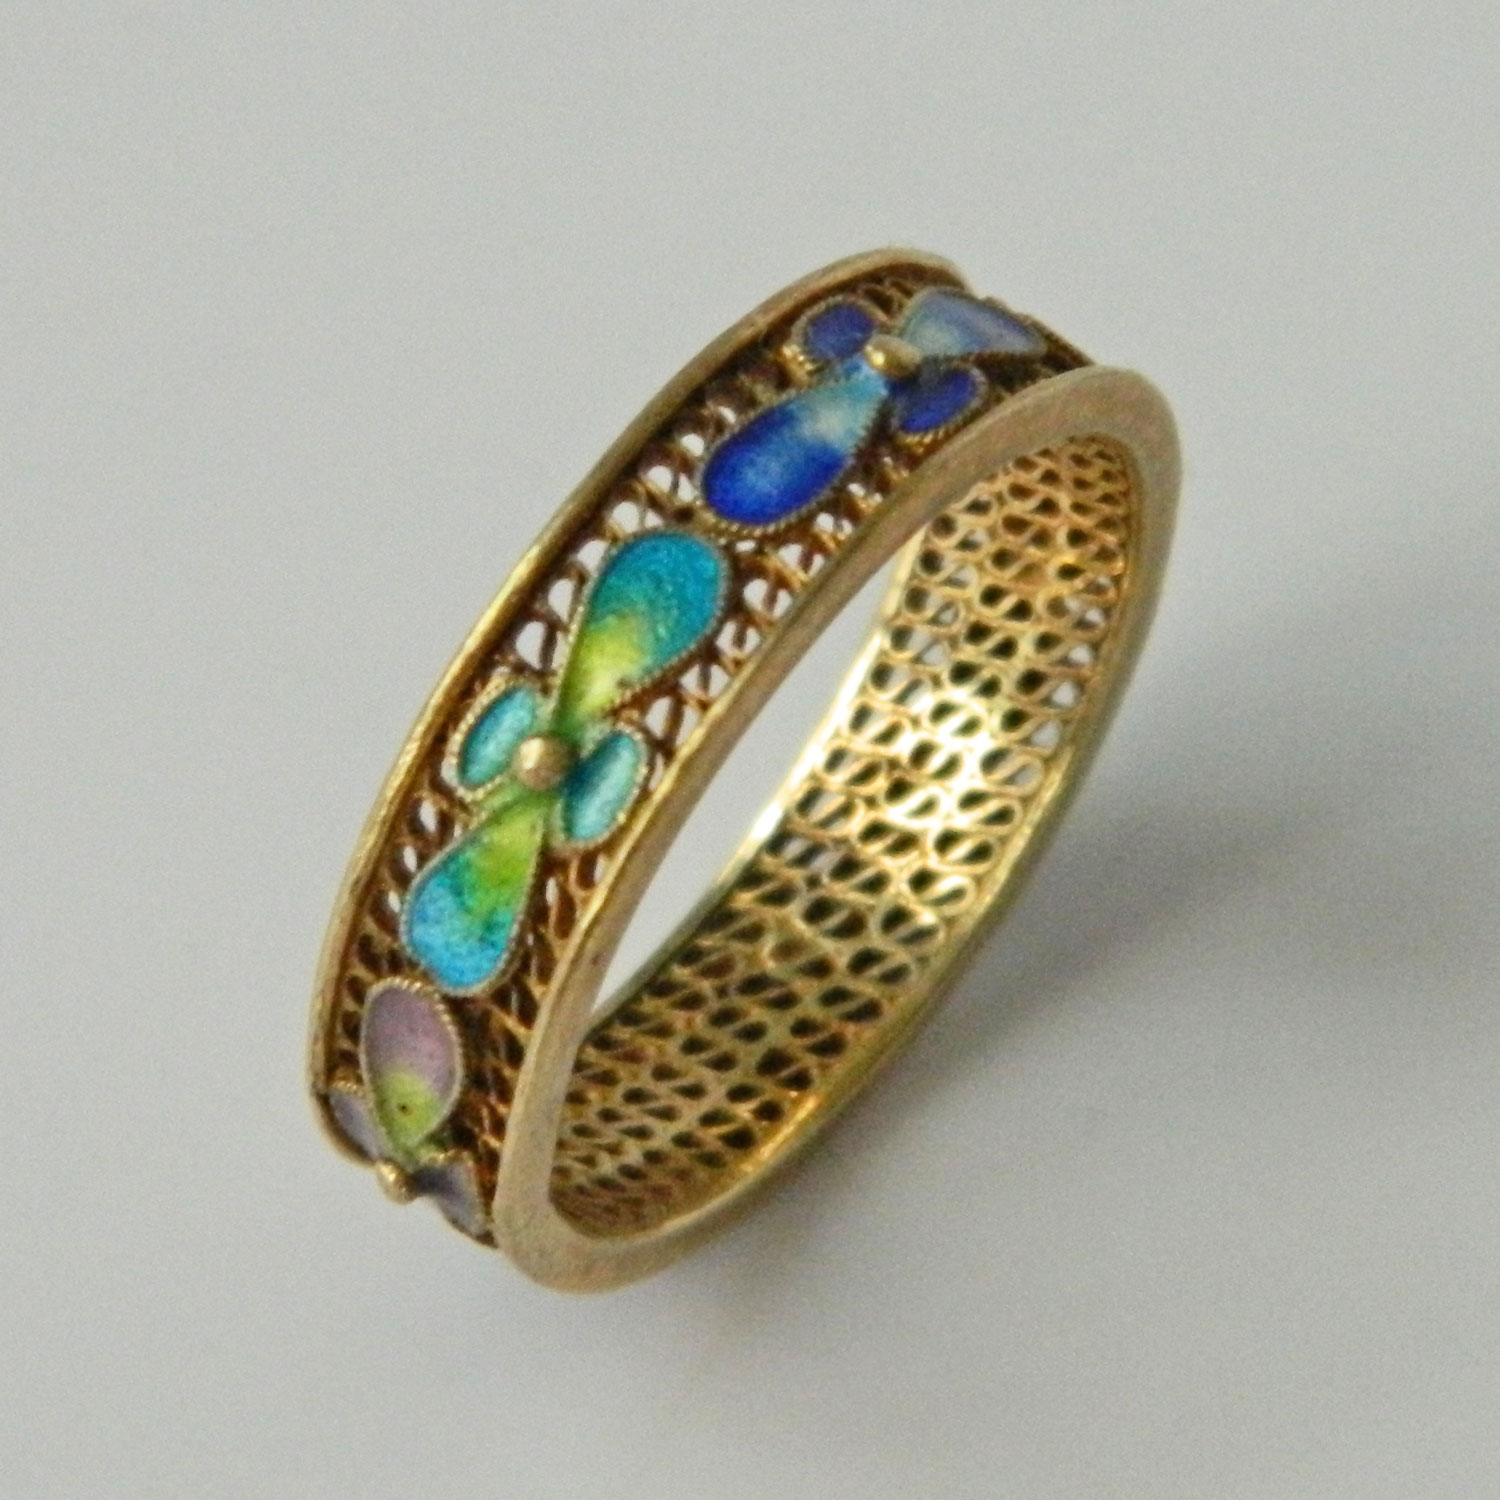 Chinese export enameled silver ring